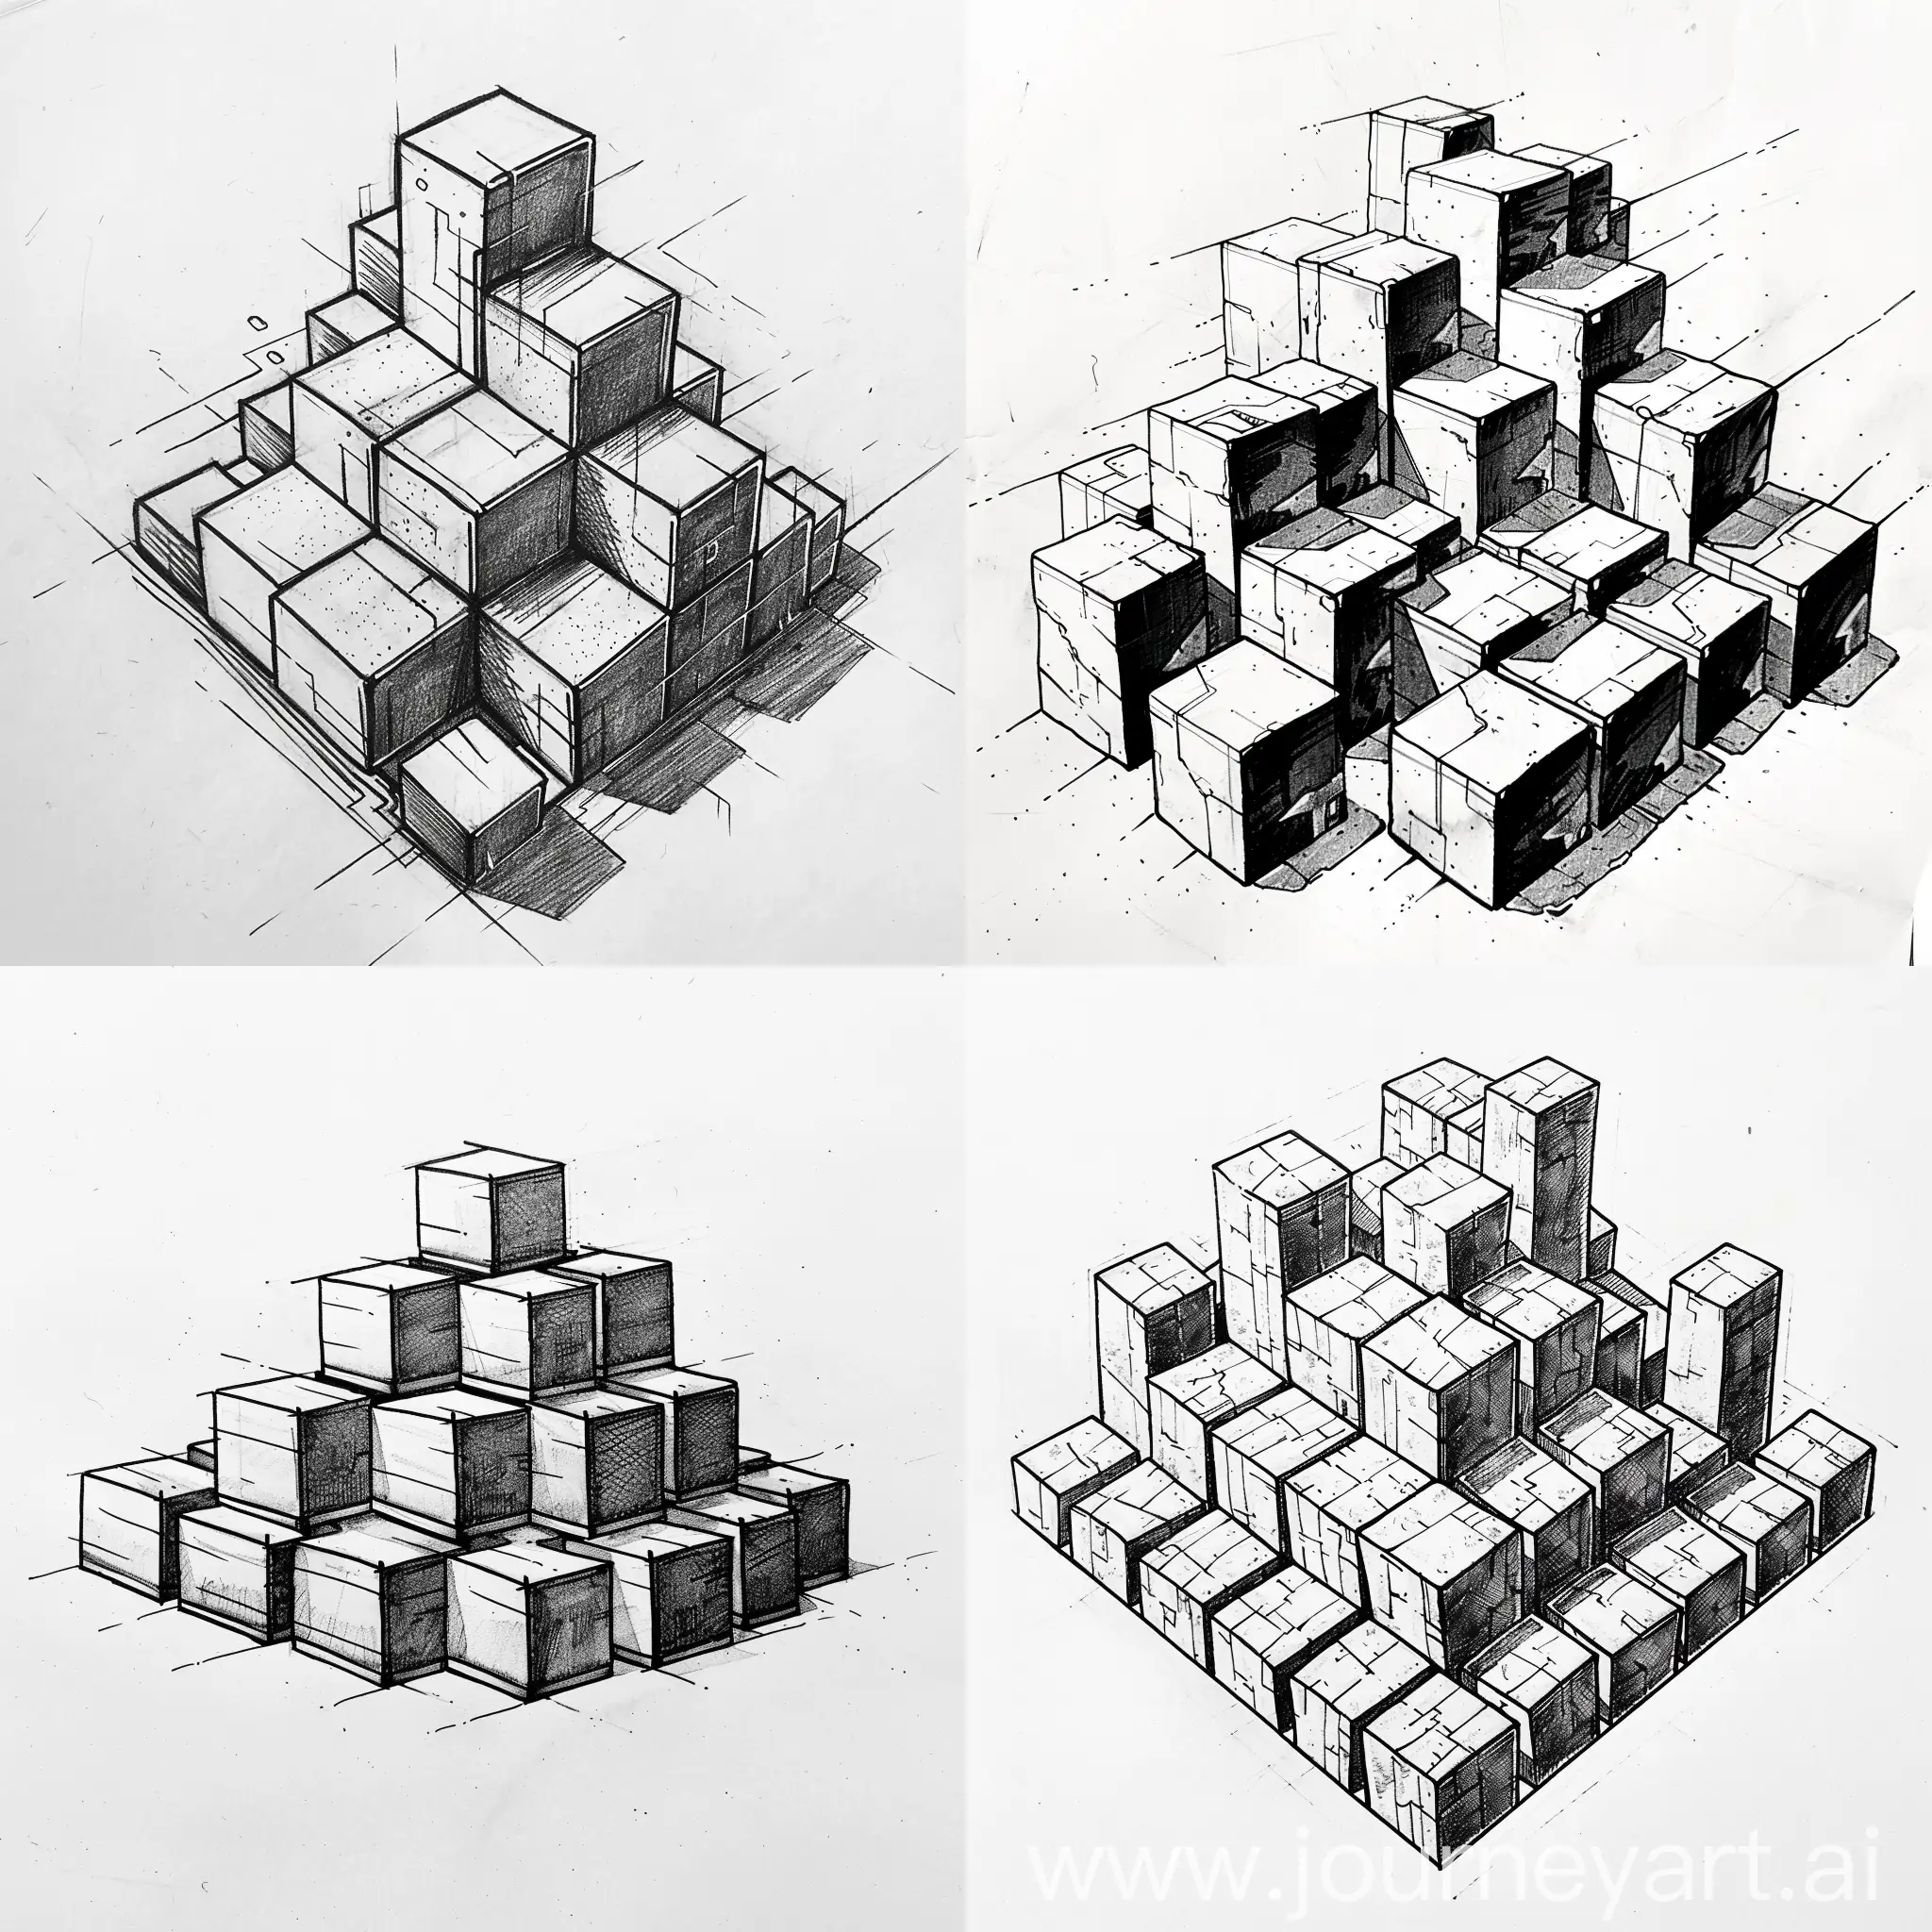 Abstract-Stepped-Cubes-Pyramid-Sketch-in-Monochrome